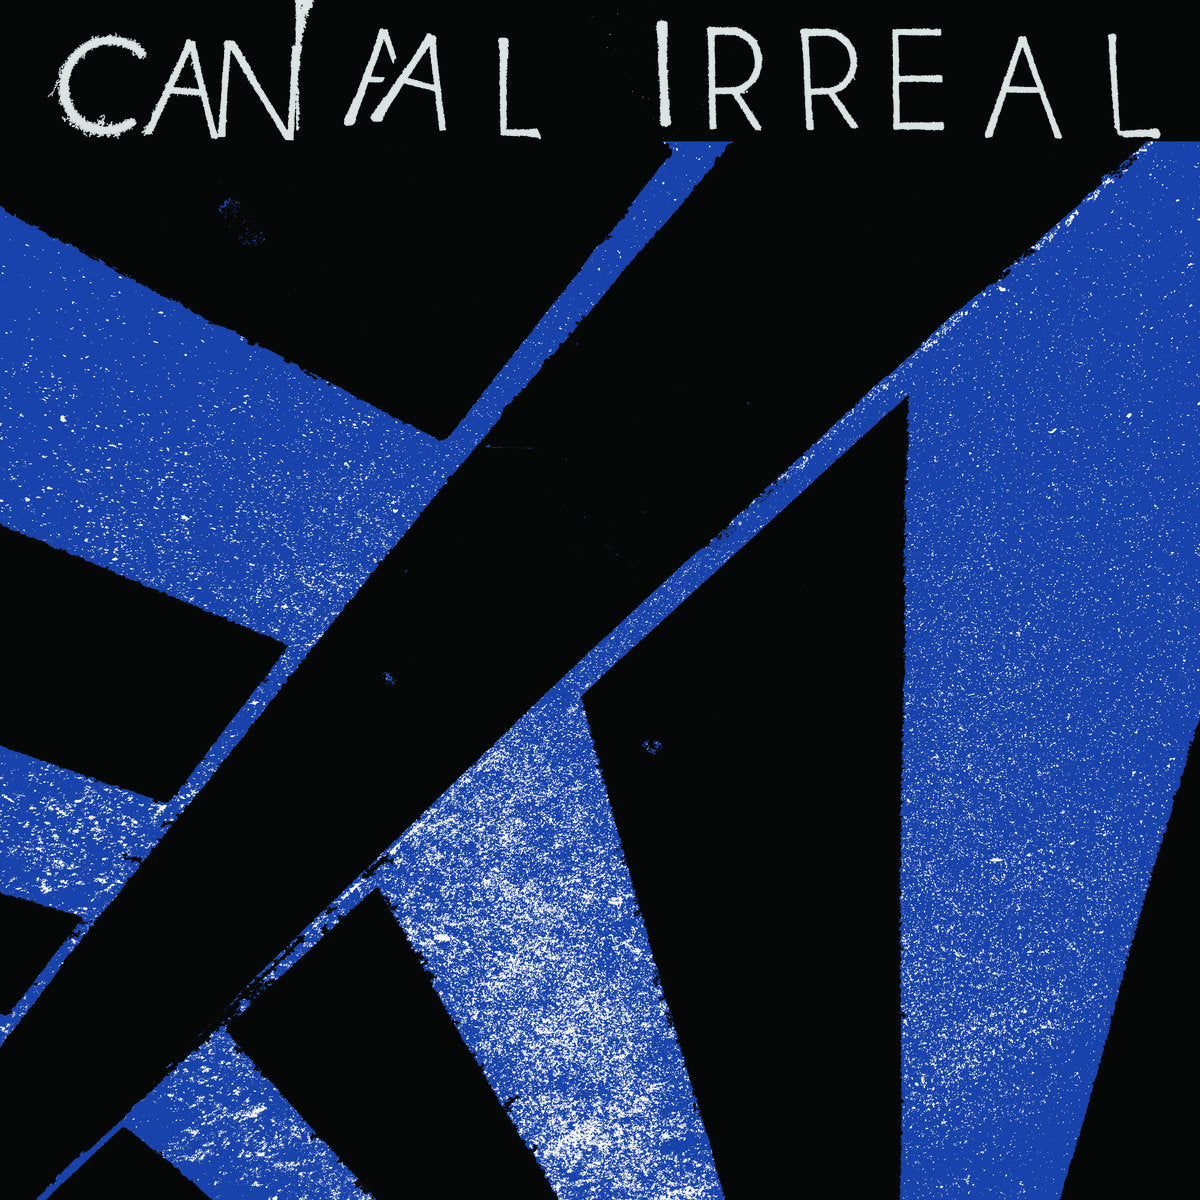 Canal Irreal "S/T" LP